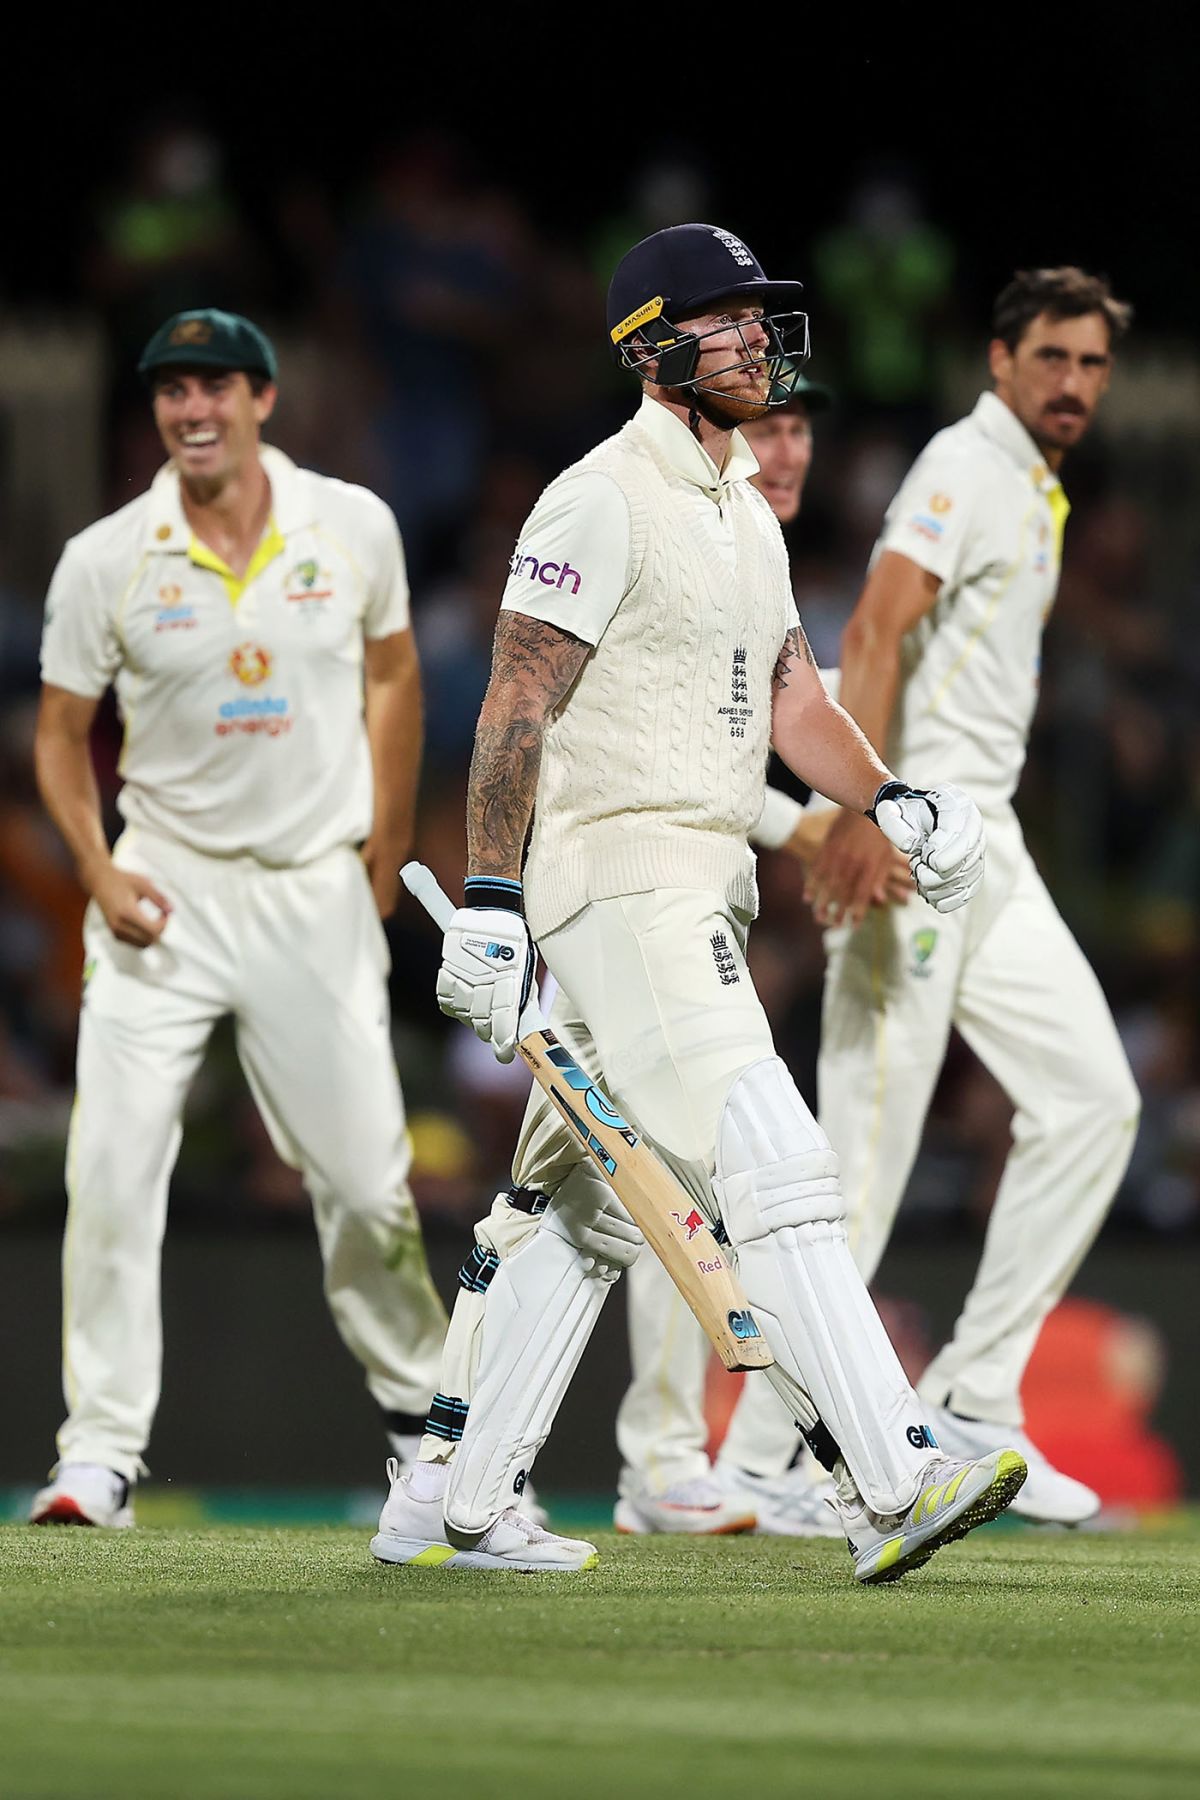 Ben Stokes was caught hooking off Mitchell Starc, Australia vs England, Men's Ashes, 5th Test, 3rd day, Hobart, January 16, 2021